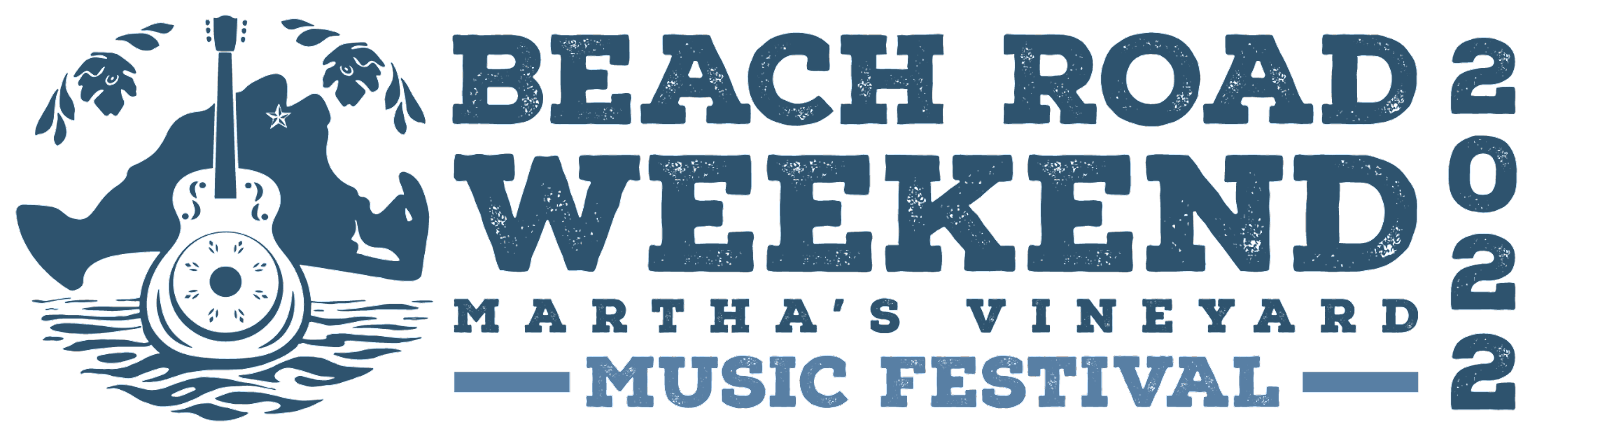 Emmylou Harris, Lucinda Williams, CAAMP, Guster and more join "BEACH ROAD WEEKEND 2022" Lineup